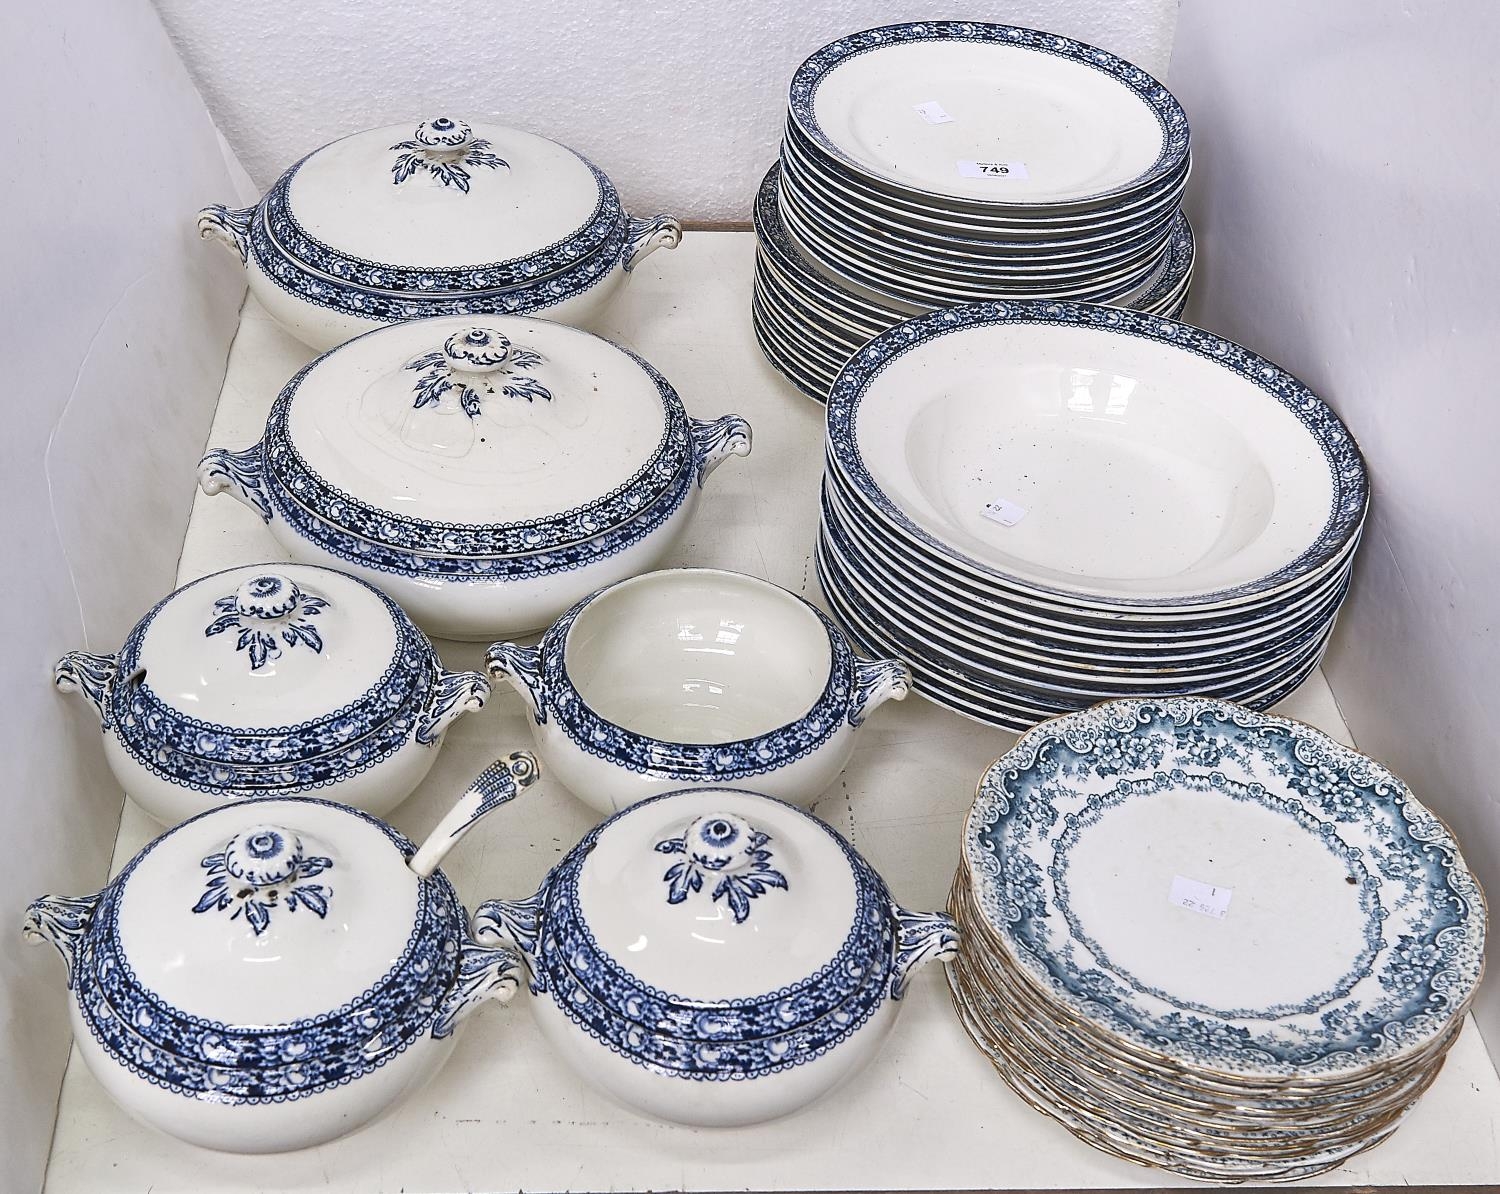 A Great Universal British Pottery part dinner service, comprising plates, soup bowls, tureens and